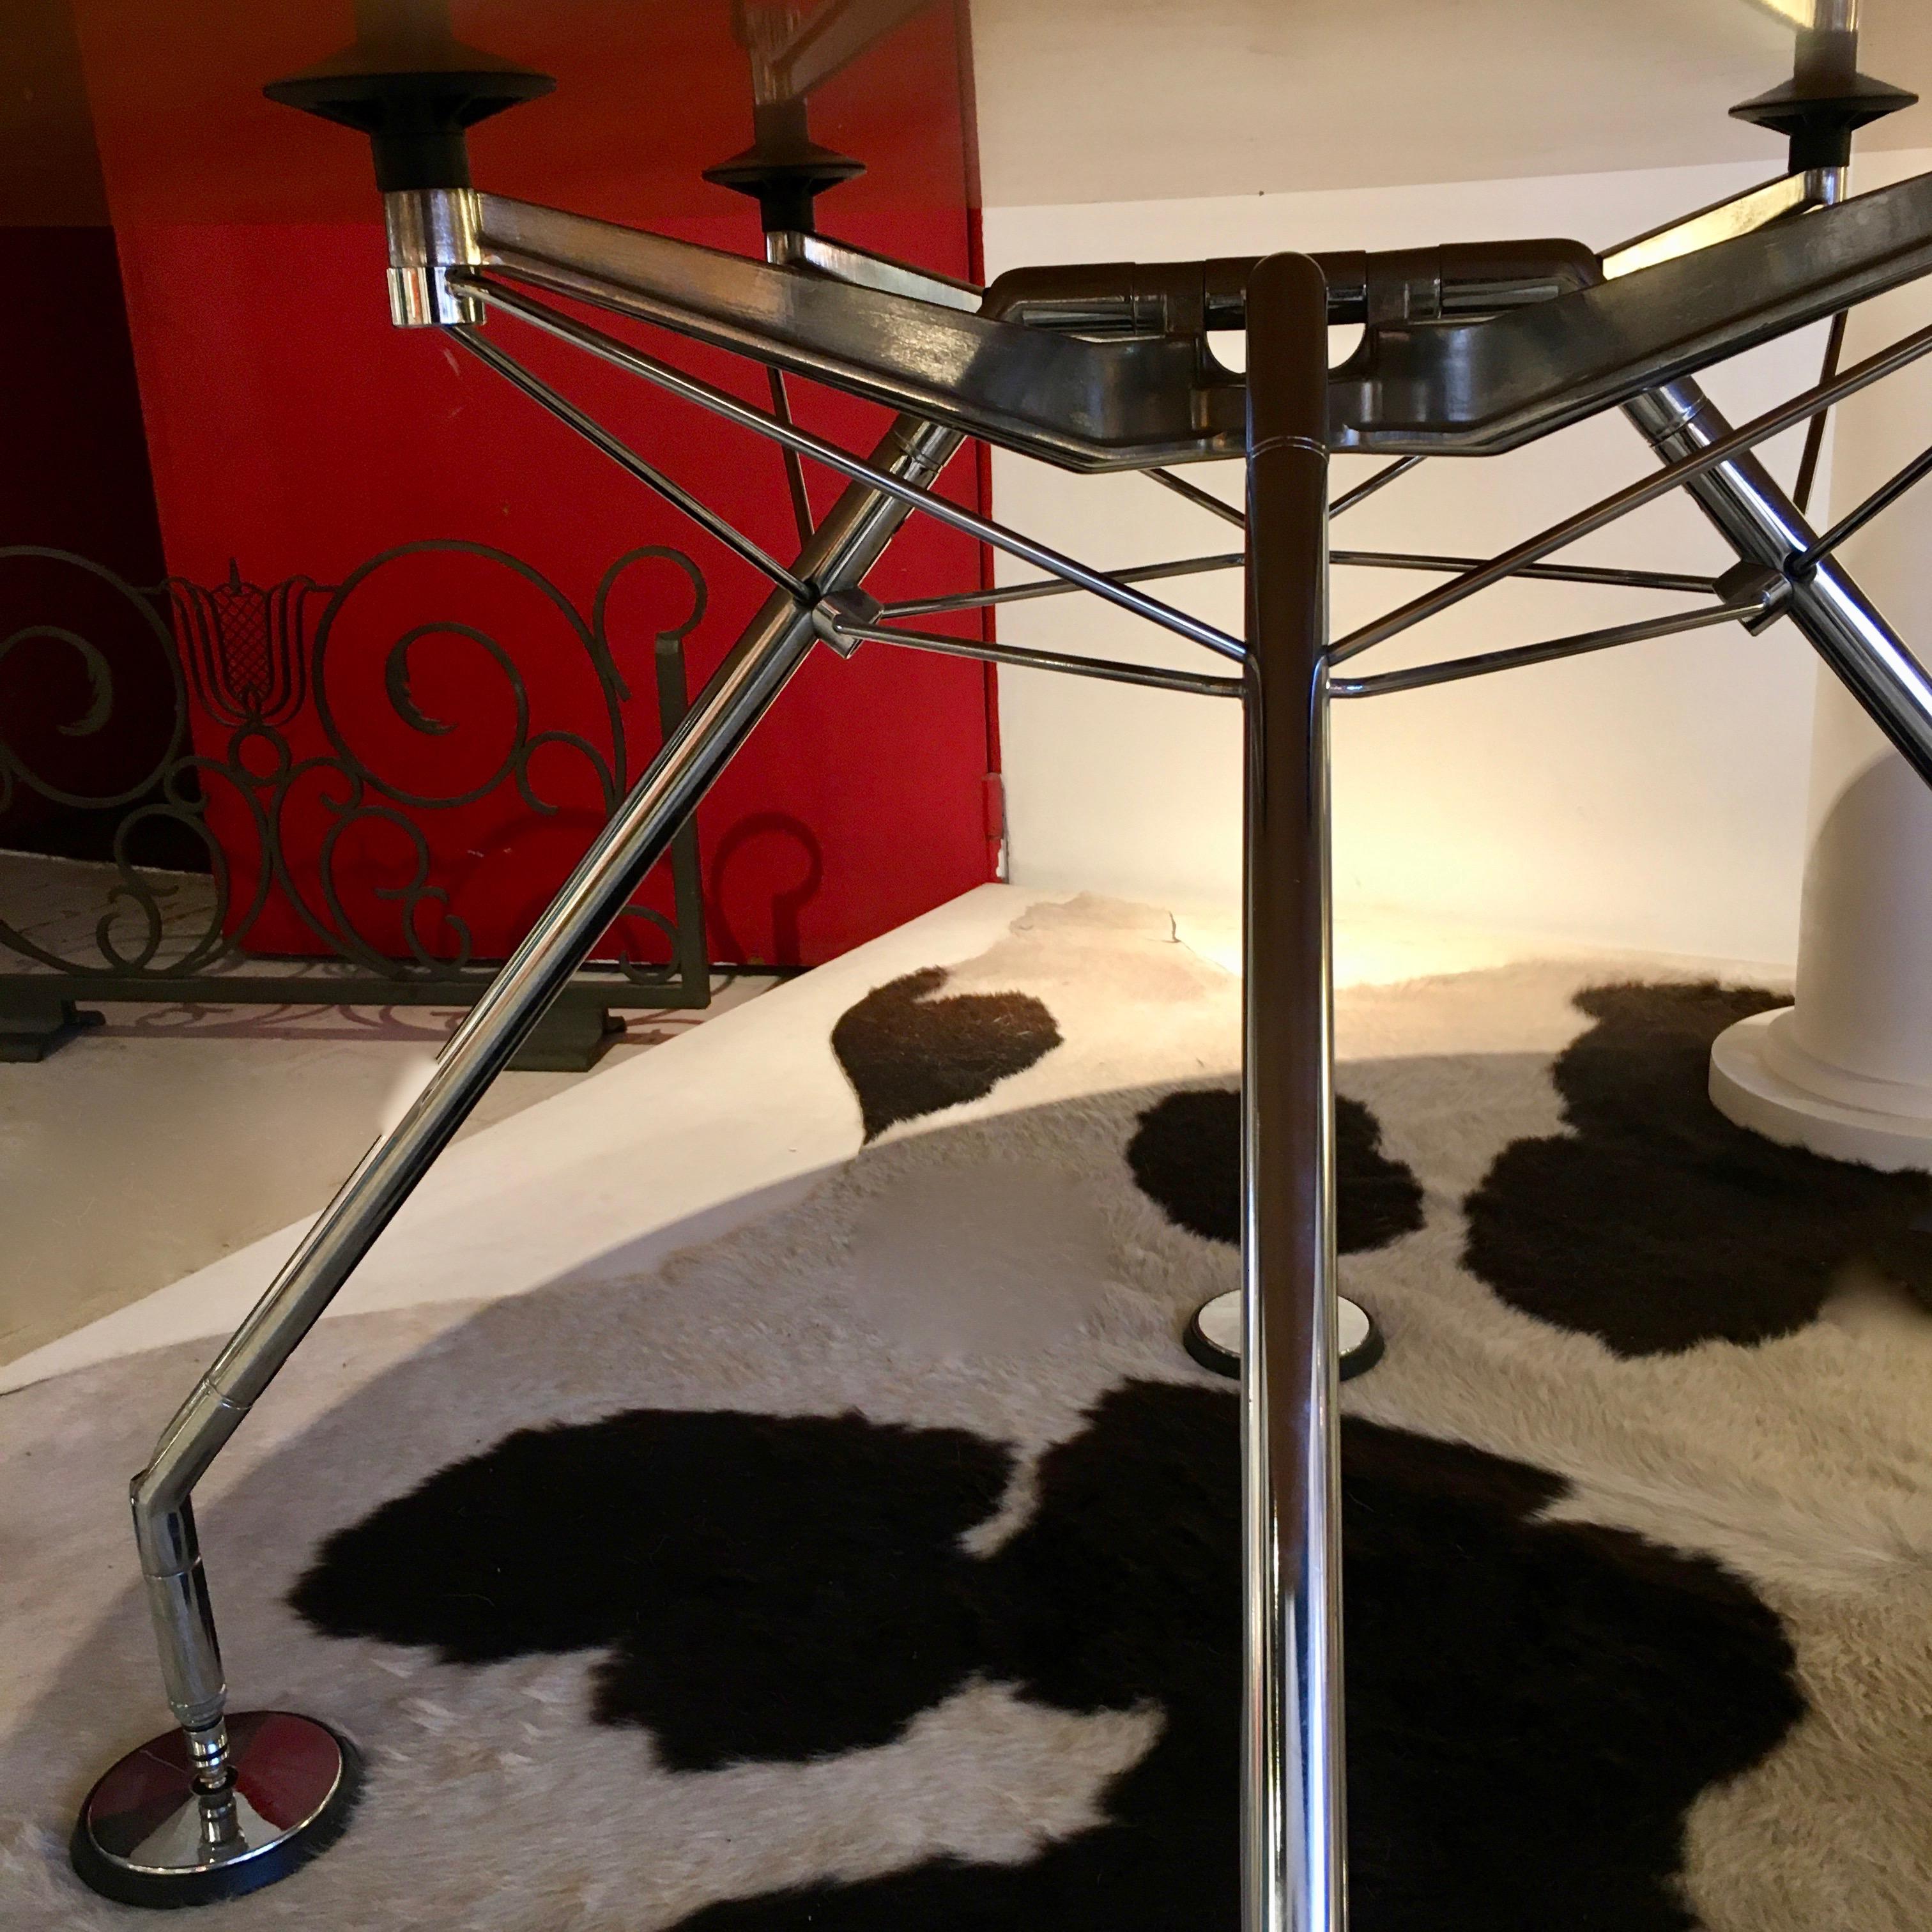 Metal Iconic Nomos Table with a Circular Walnut Top by Norman Foster, Italy 1986 For Sale